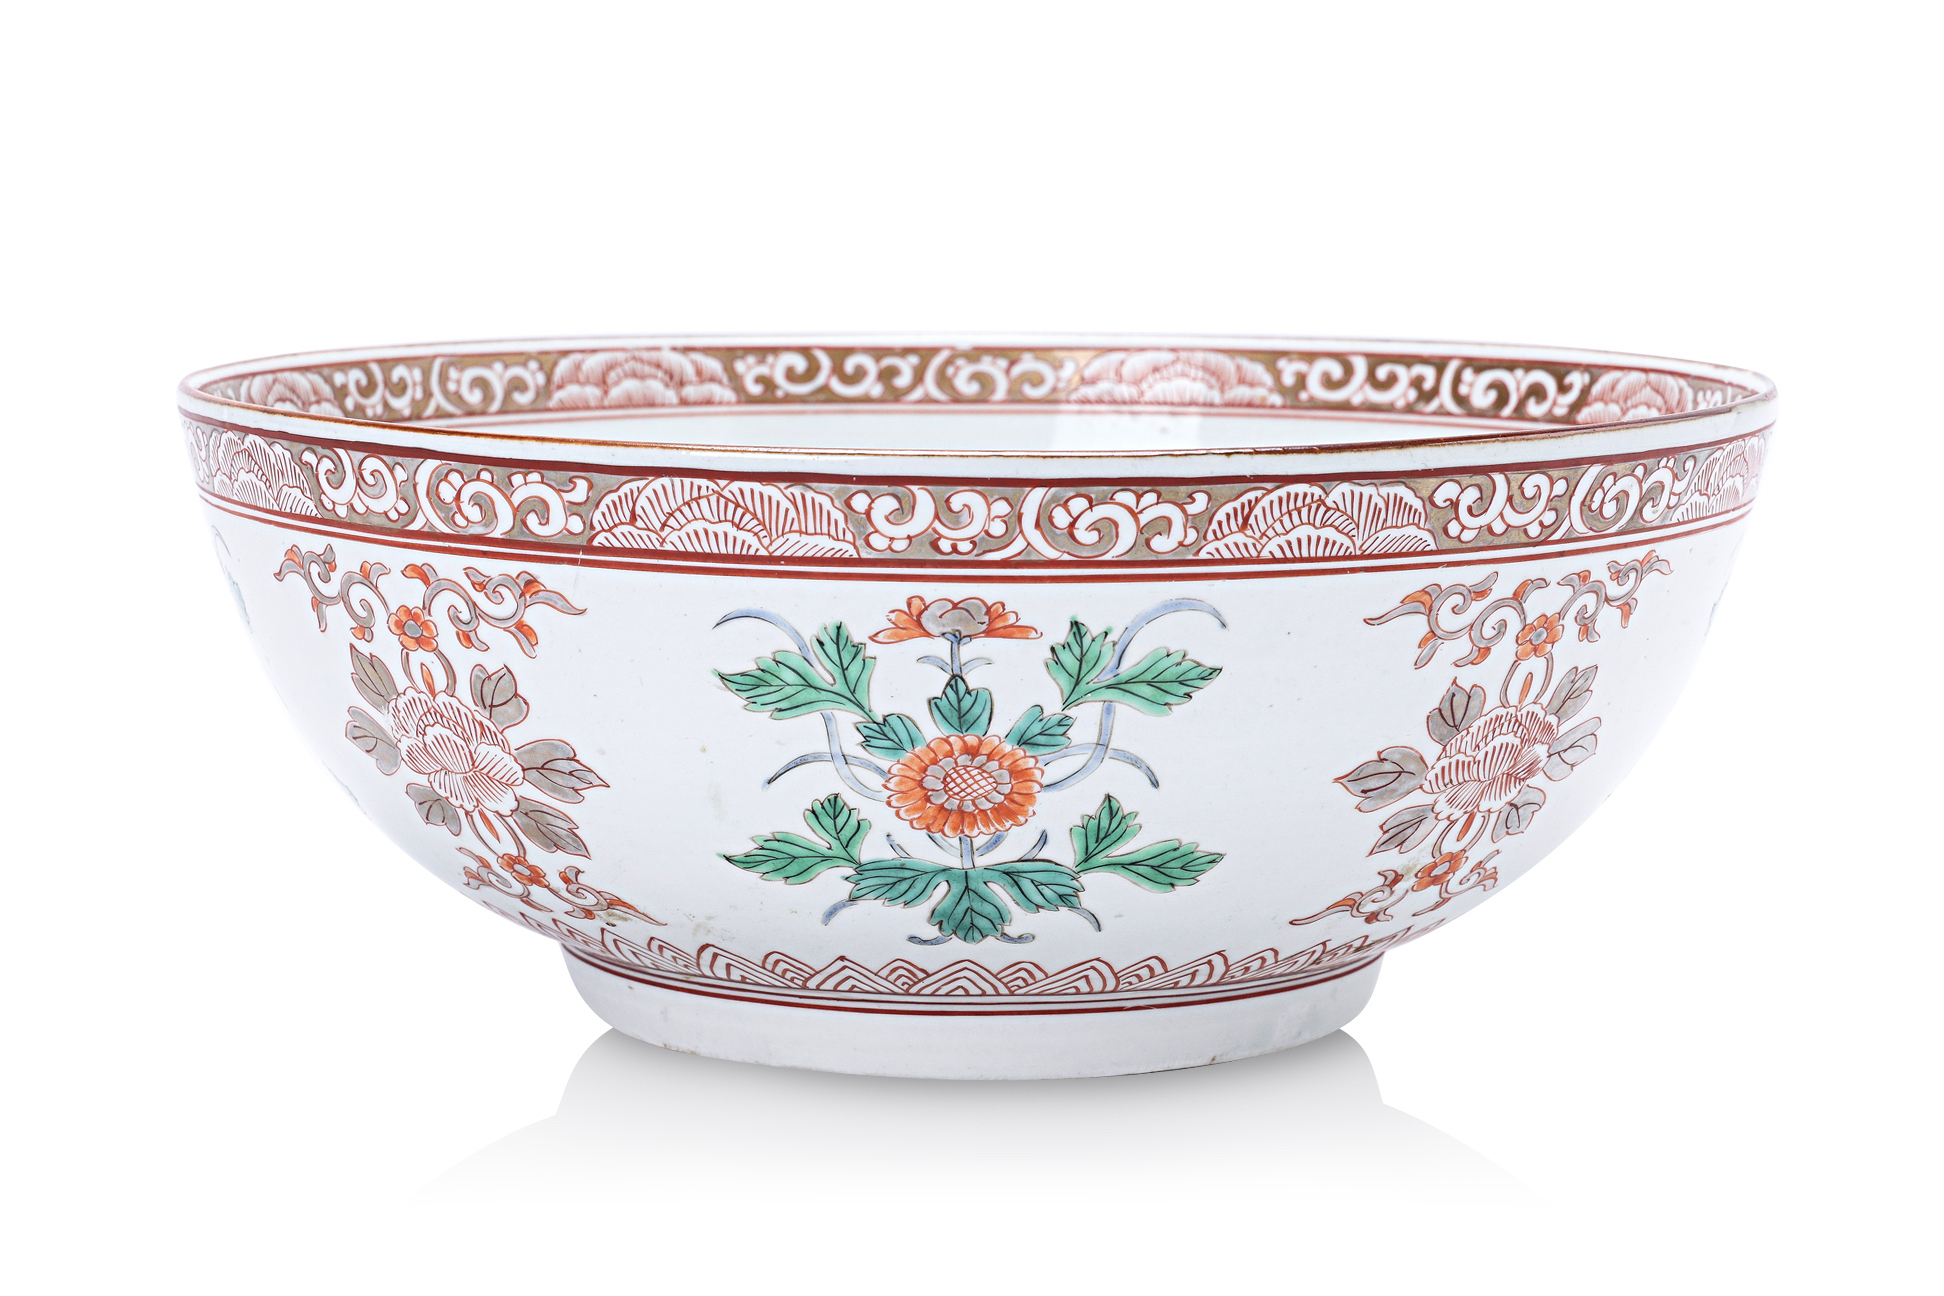 A LARGE CHINESE EXPORT PORCELAIN BOWL